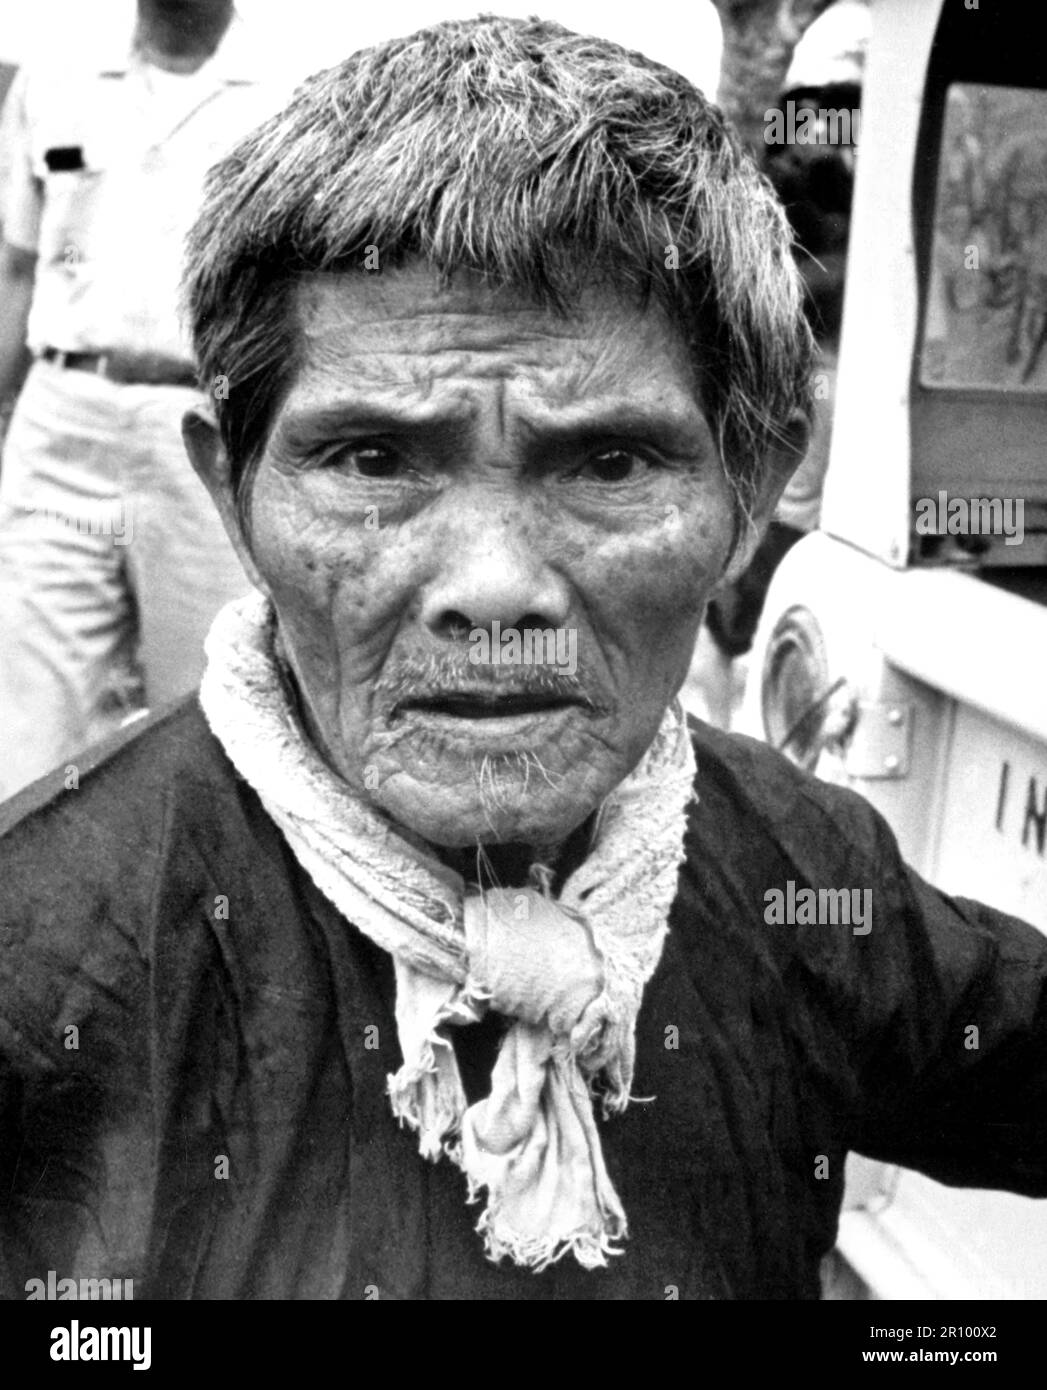 The strain shows clearly on the face of the Vietnamese, farmer, one of 4,500 who recently fled their homes to escape Vietcong harassment.  The refugees left hamlets which had been family homes for generations.  Circa 1966. Stock Photo